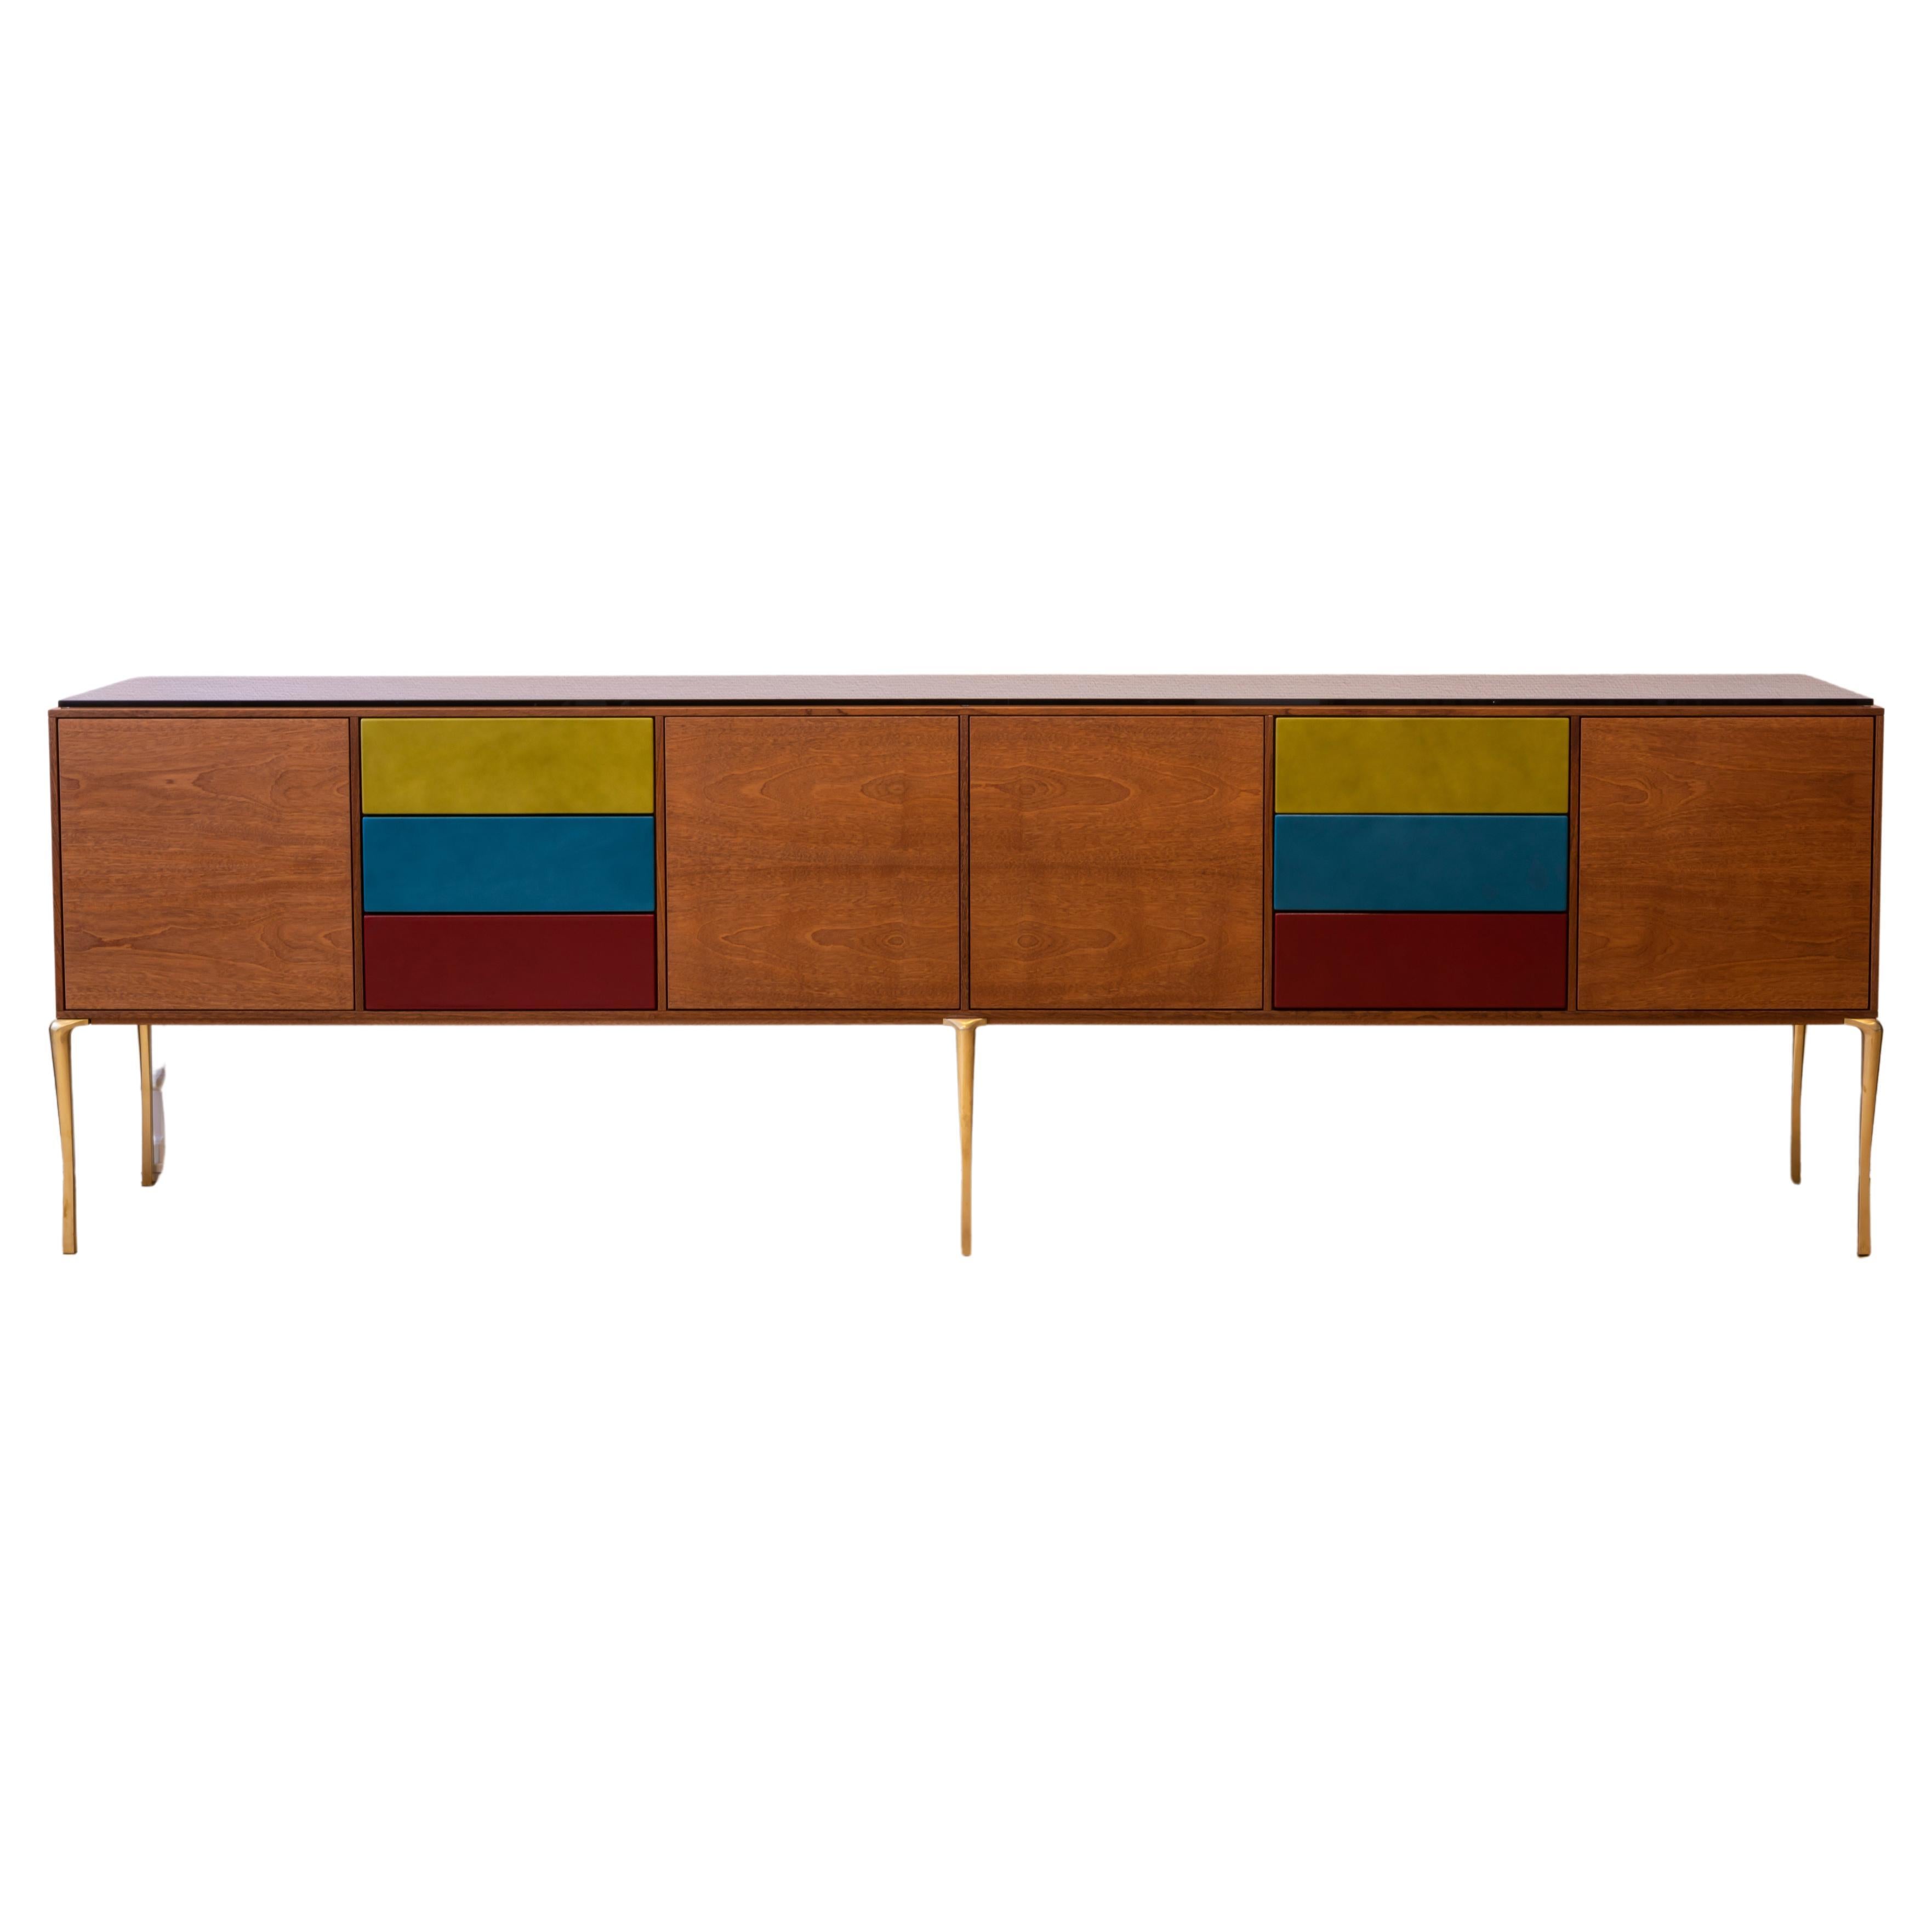 Copenhagen Console, Mahogny Frame and Leather Drawers with Solid Brass Legs